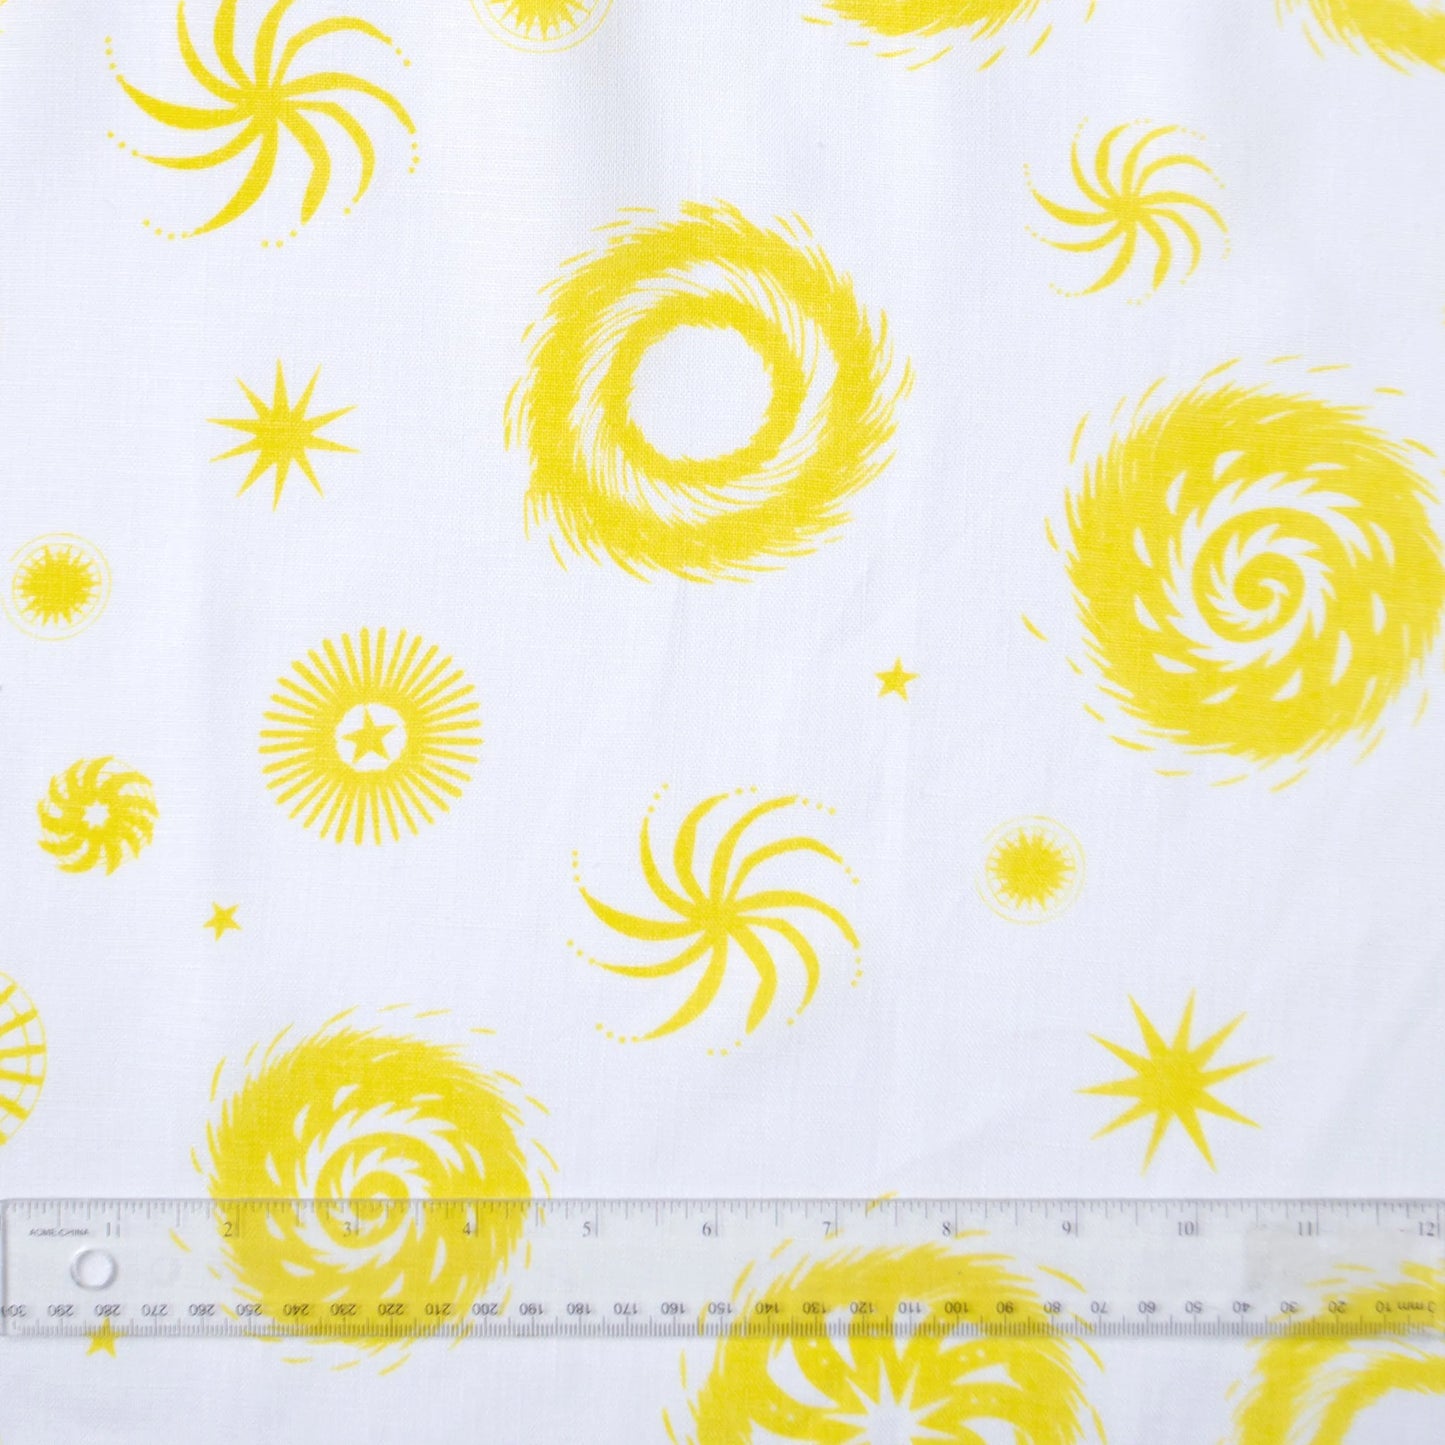 YELLOW AND WHITE FIREWORKS LINEN TEA TOWEL